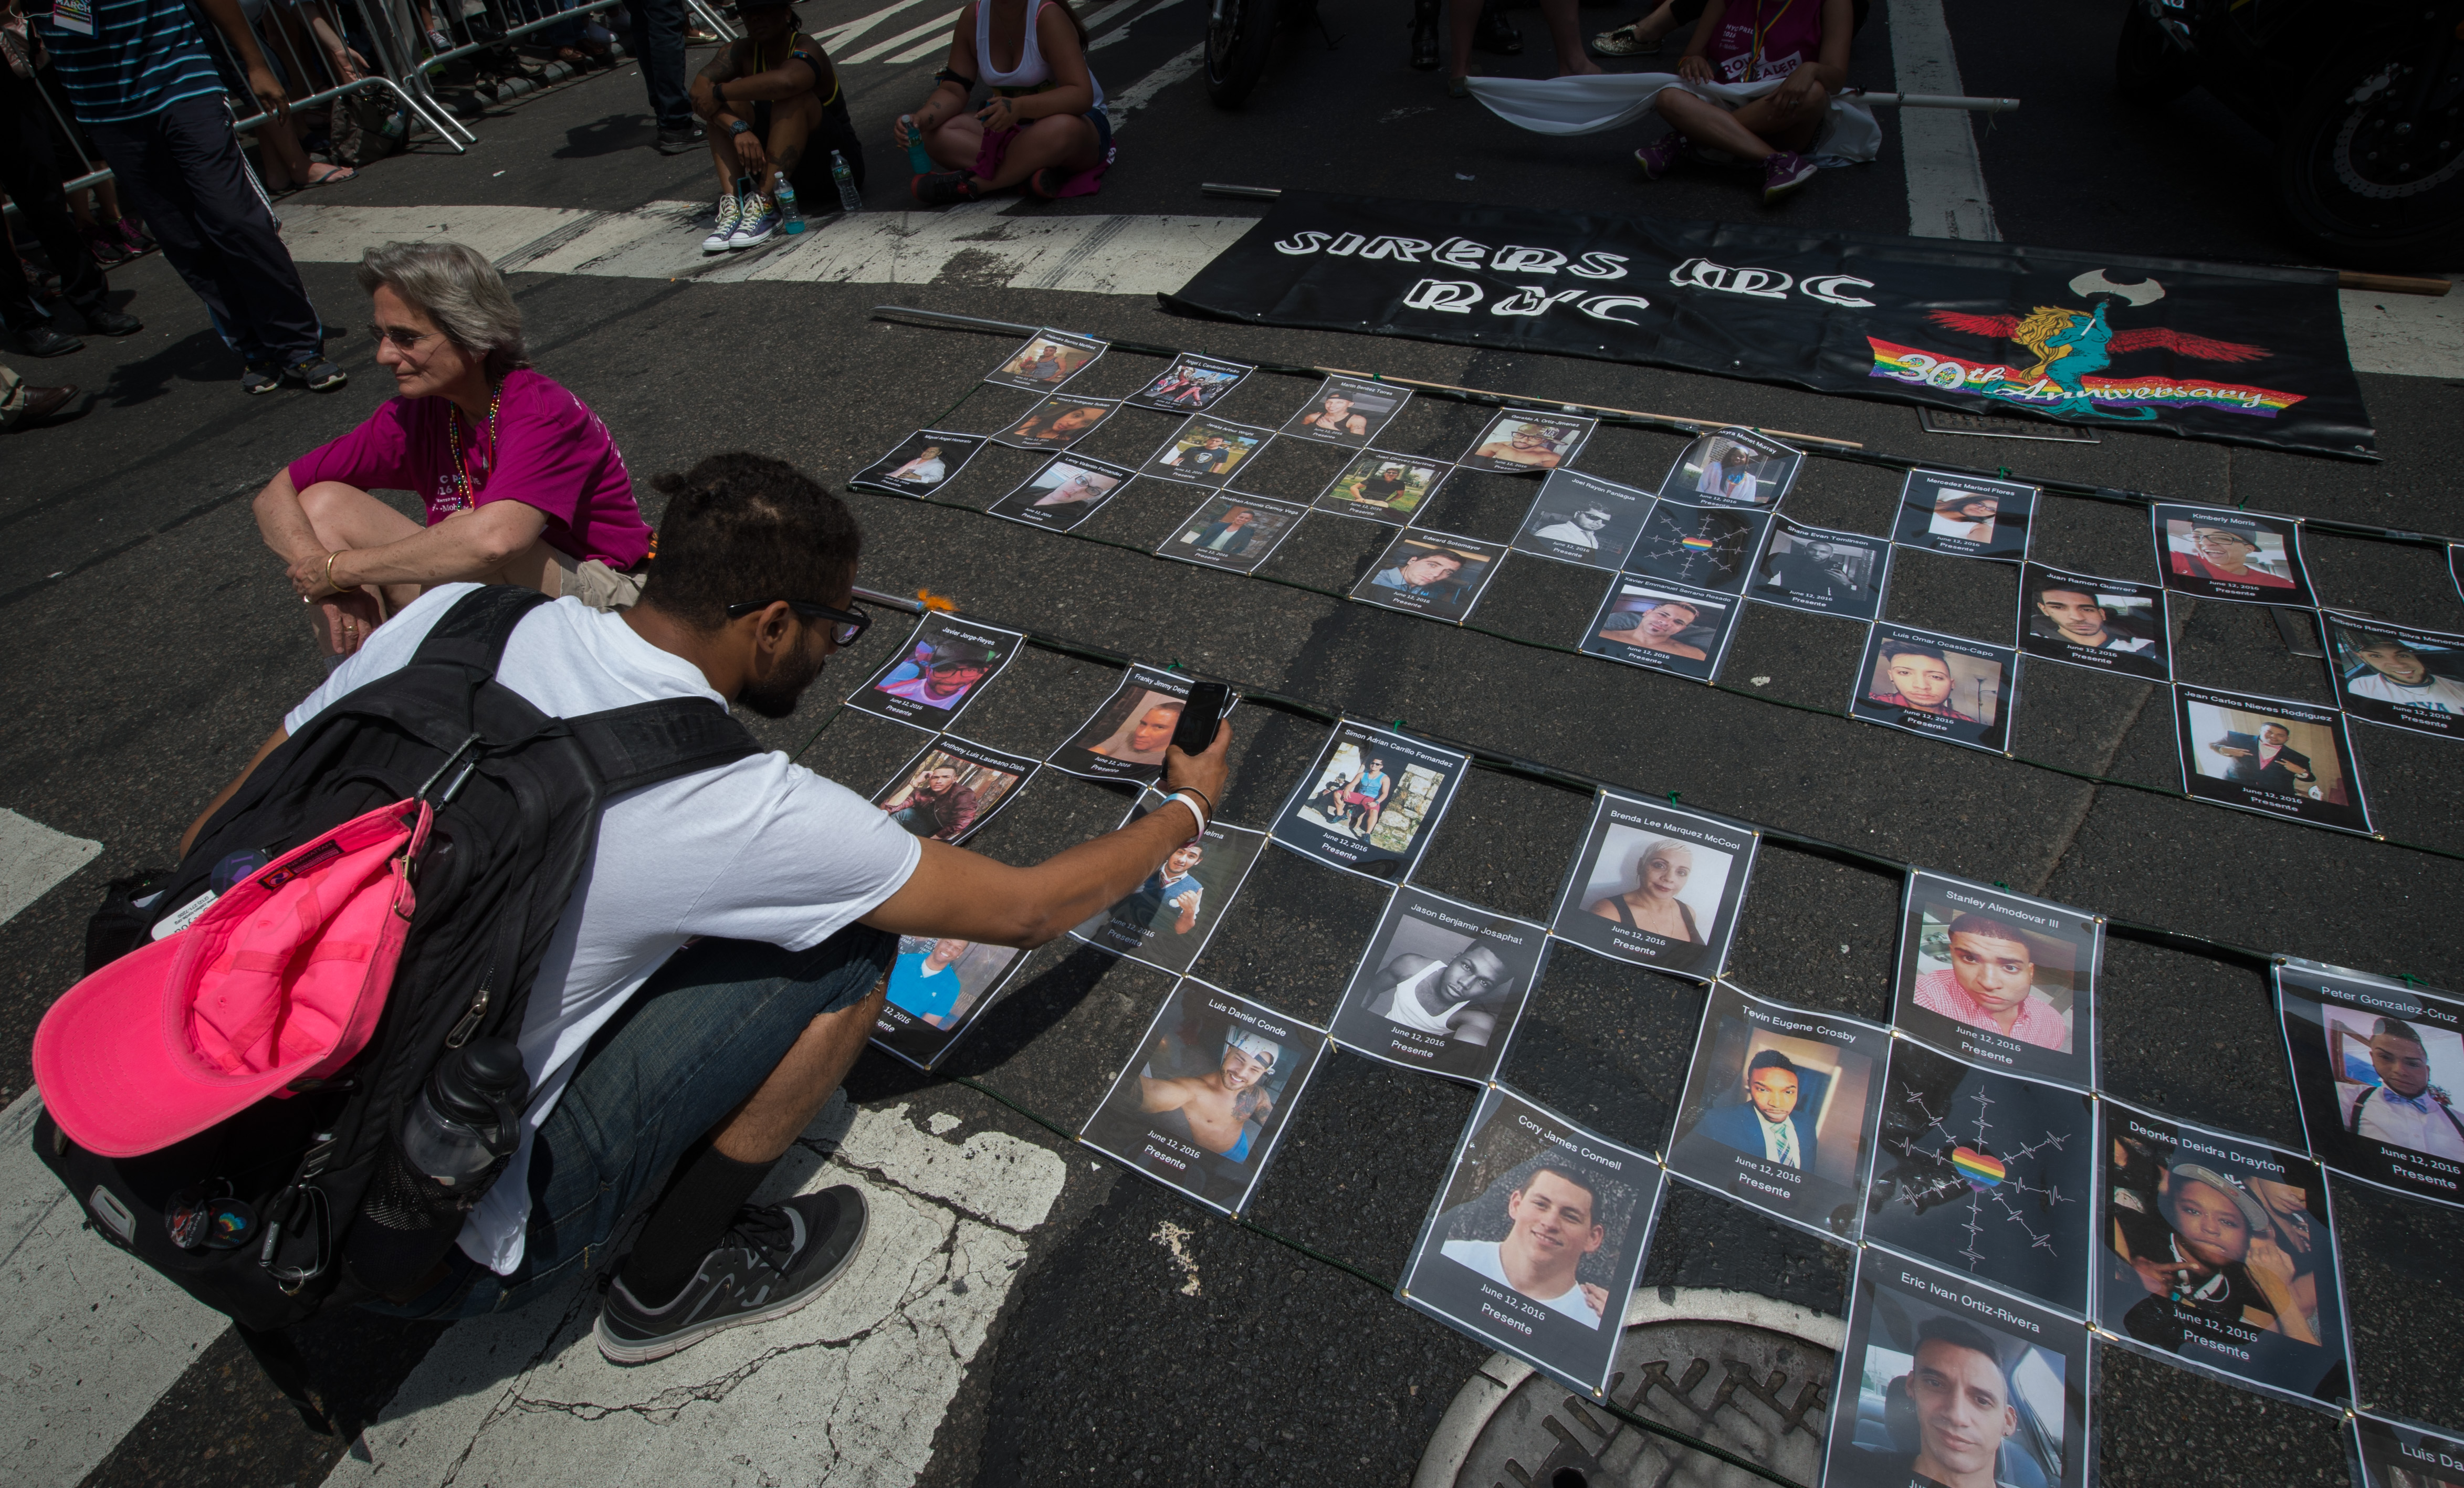 Photographs of the victims of the Orlando Pulse nightclub shooting are laid out prior to the start of the 46th annual gay-pride march in New York City on June 26, 2016 (Bryan R. Smith—AFP/Getty Images)